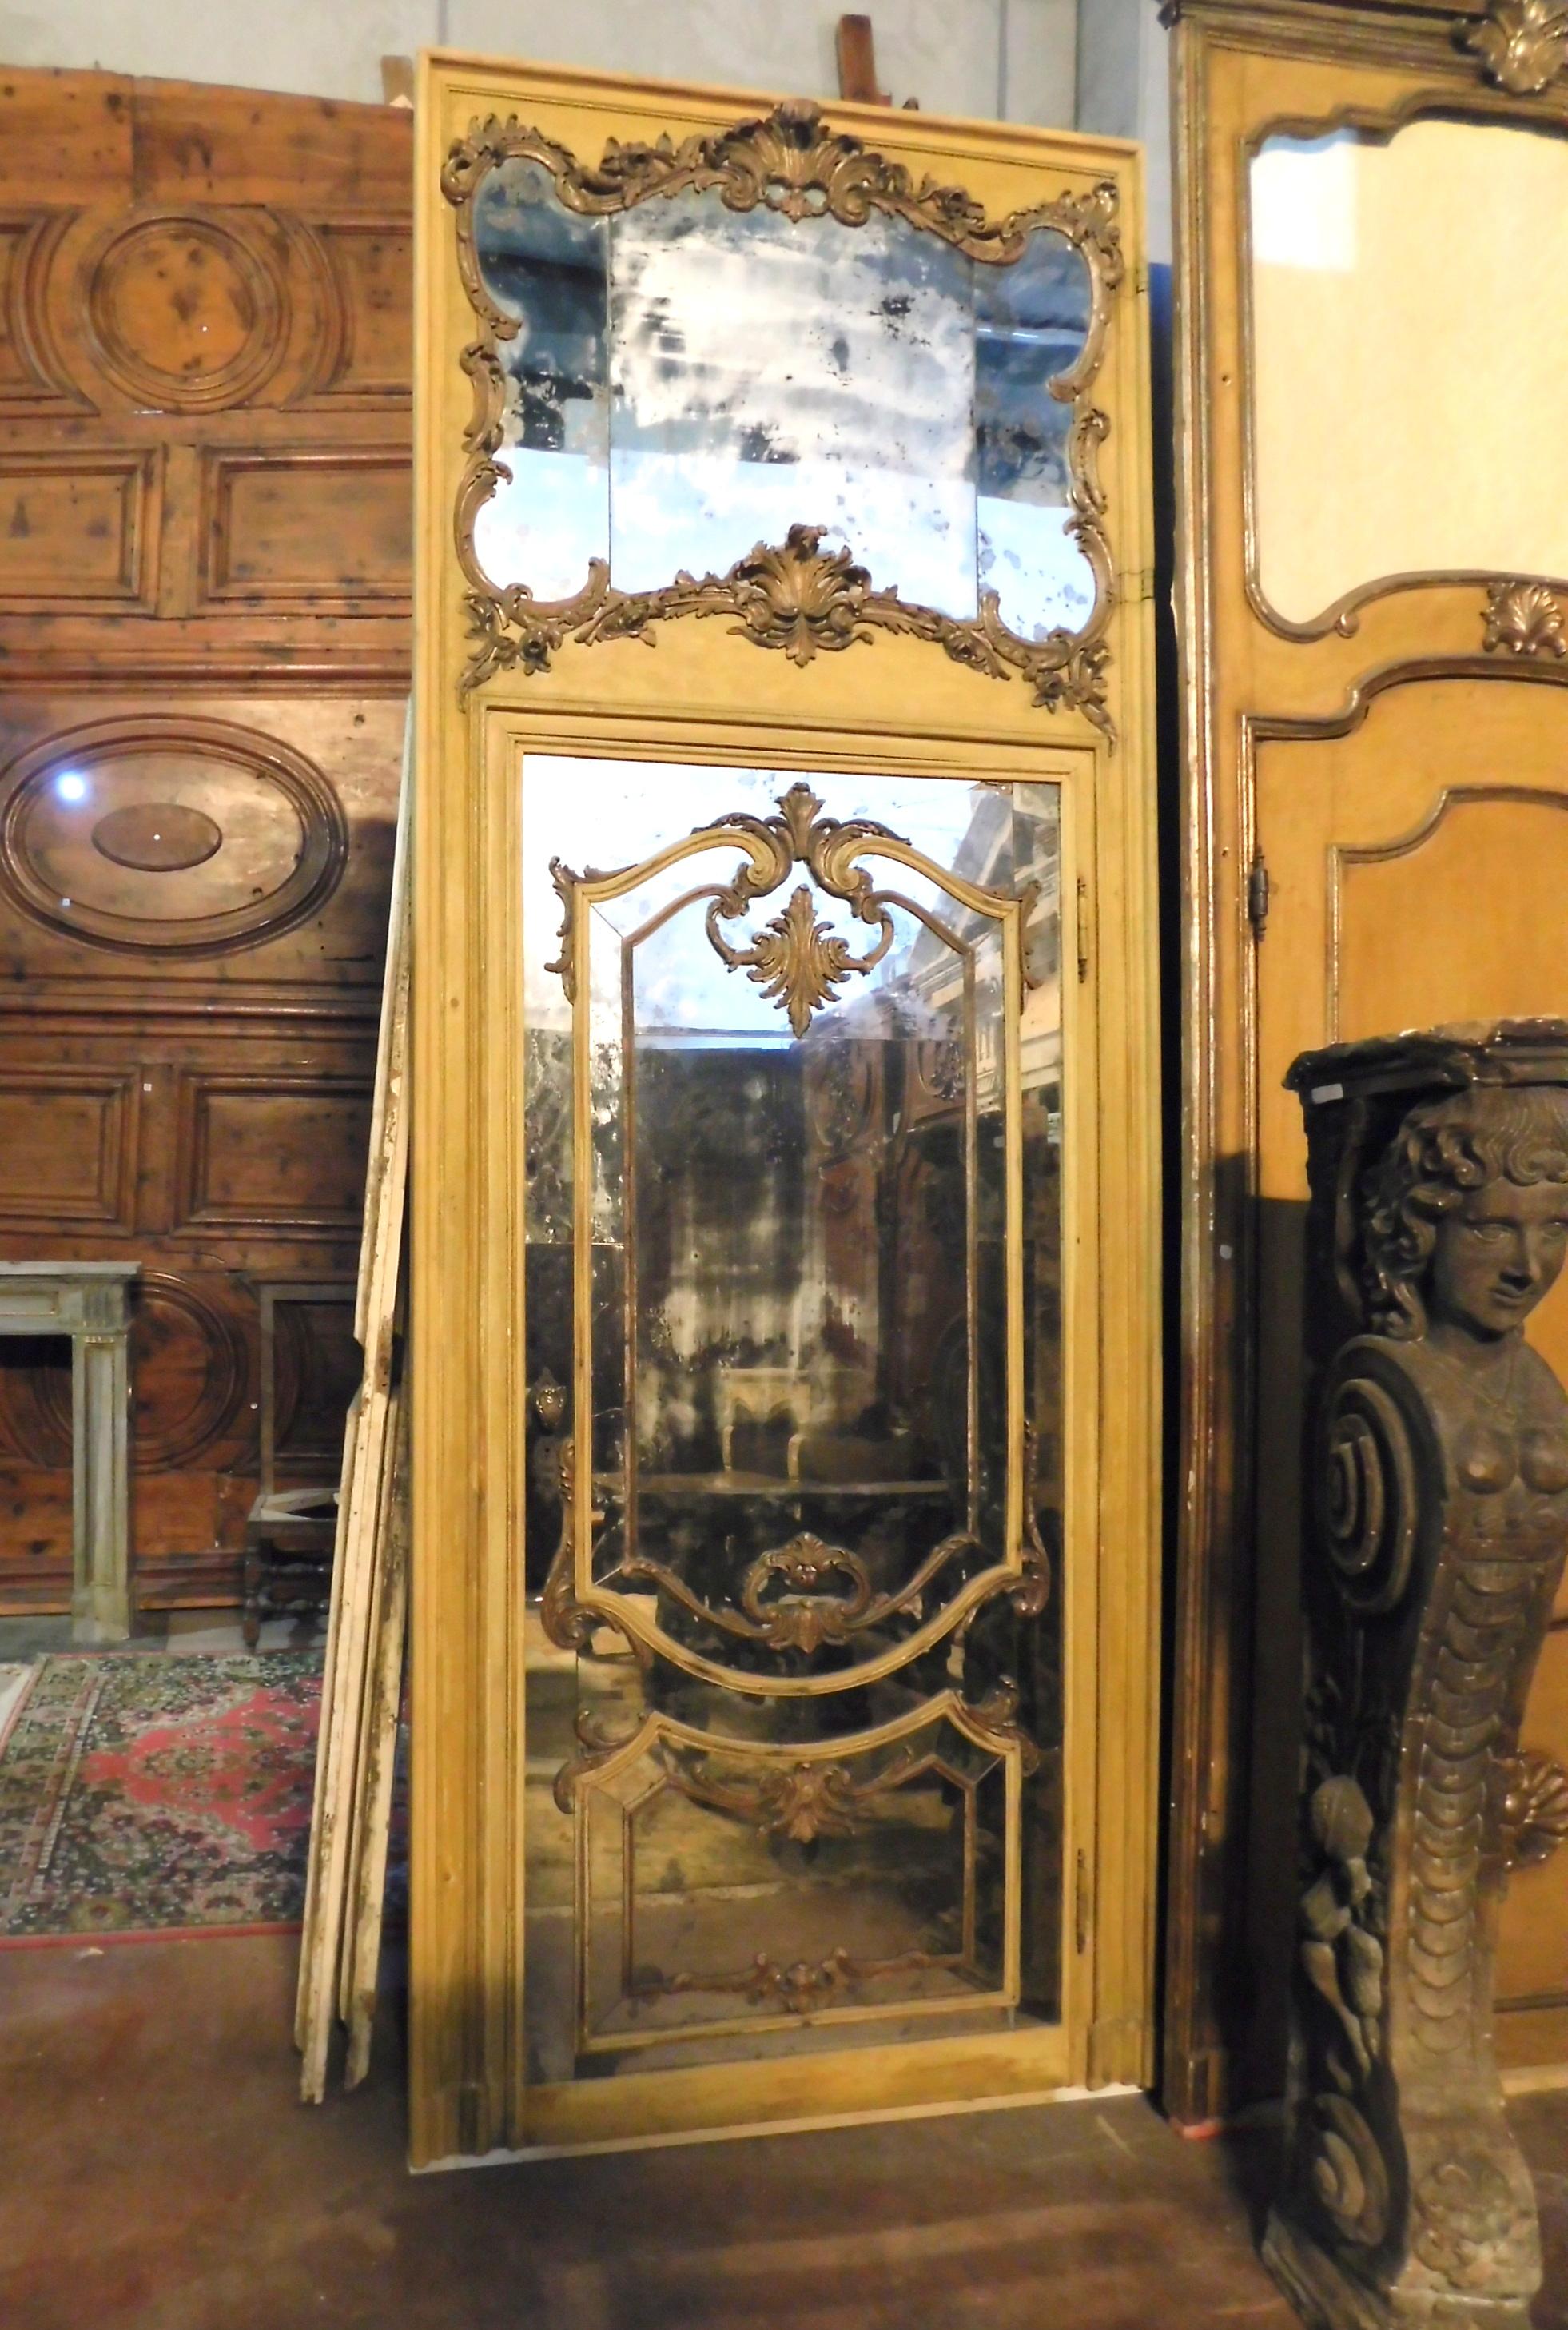 2 ancient original Baroque doors hand-lacquered gilded with leaf, an important door with a chopped mirror, built at the beginning of the 18th century by an Italian artist, come from a large villa in Milan. They will surely give luxury and great